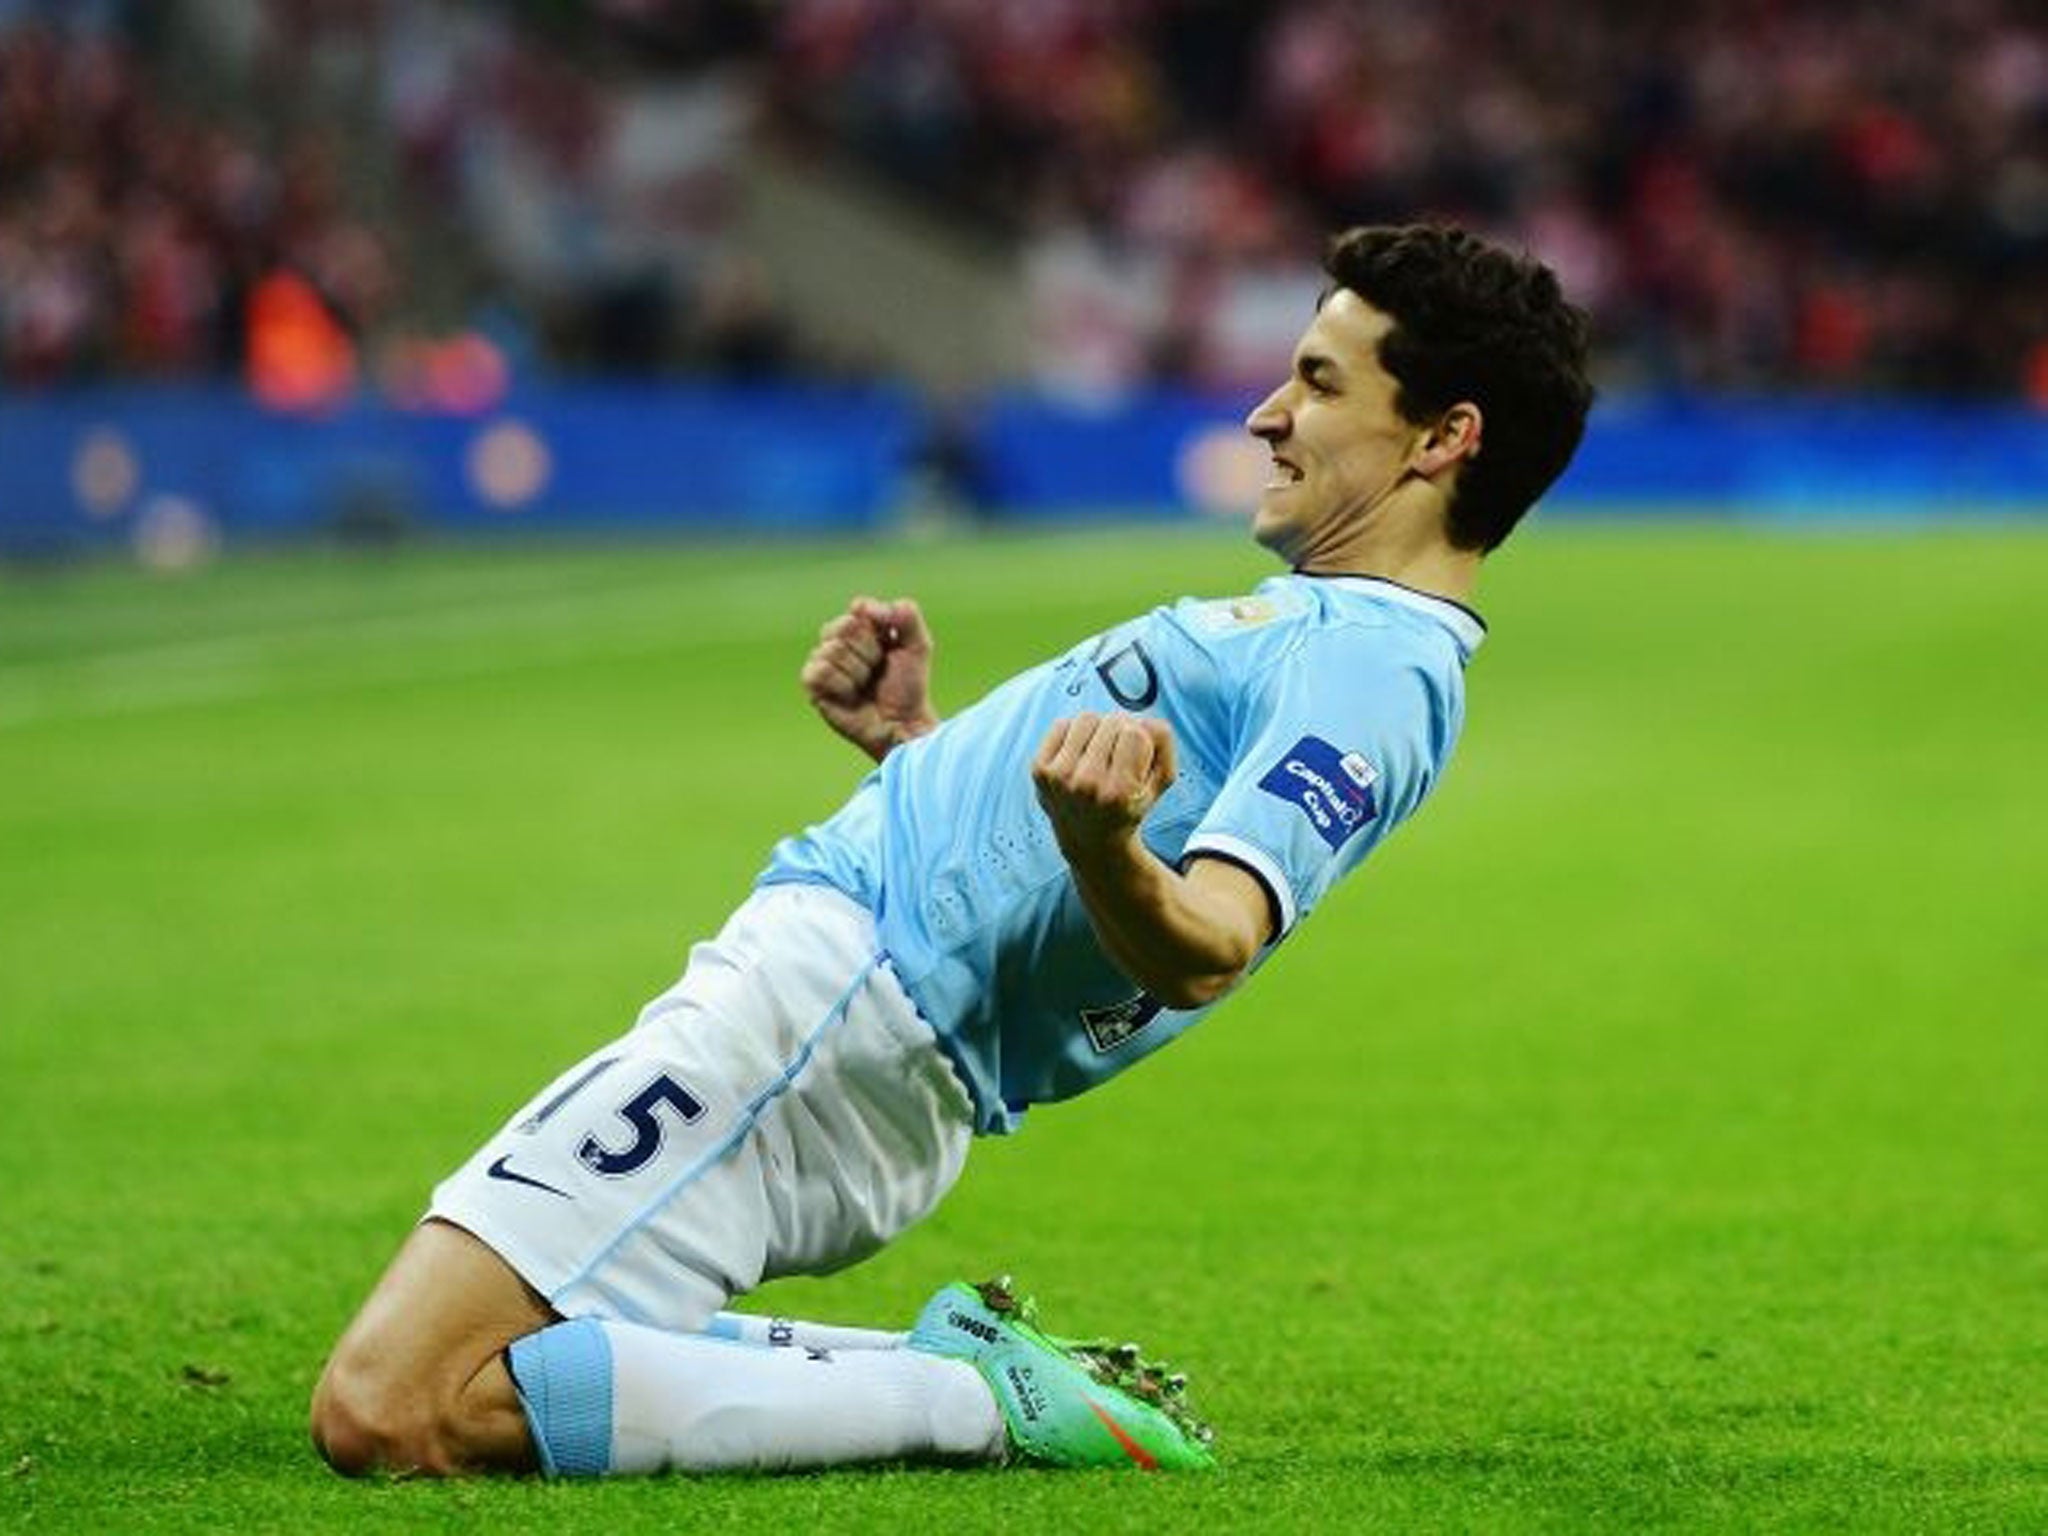 Jesus Navas of Manchester City celebrates after scoring his team's third goal during the Capital One Cup Final between Manchester City and Sunderland at Wembley Stadium (Getty)